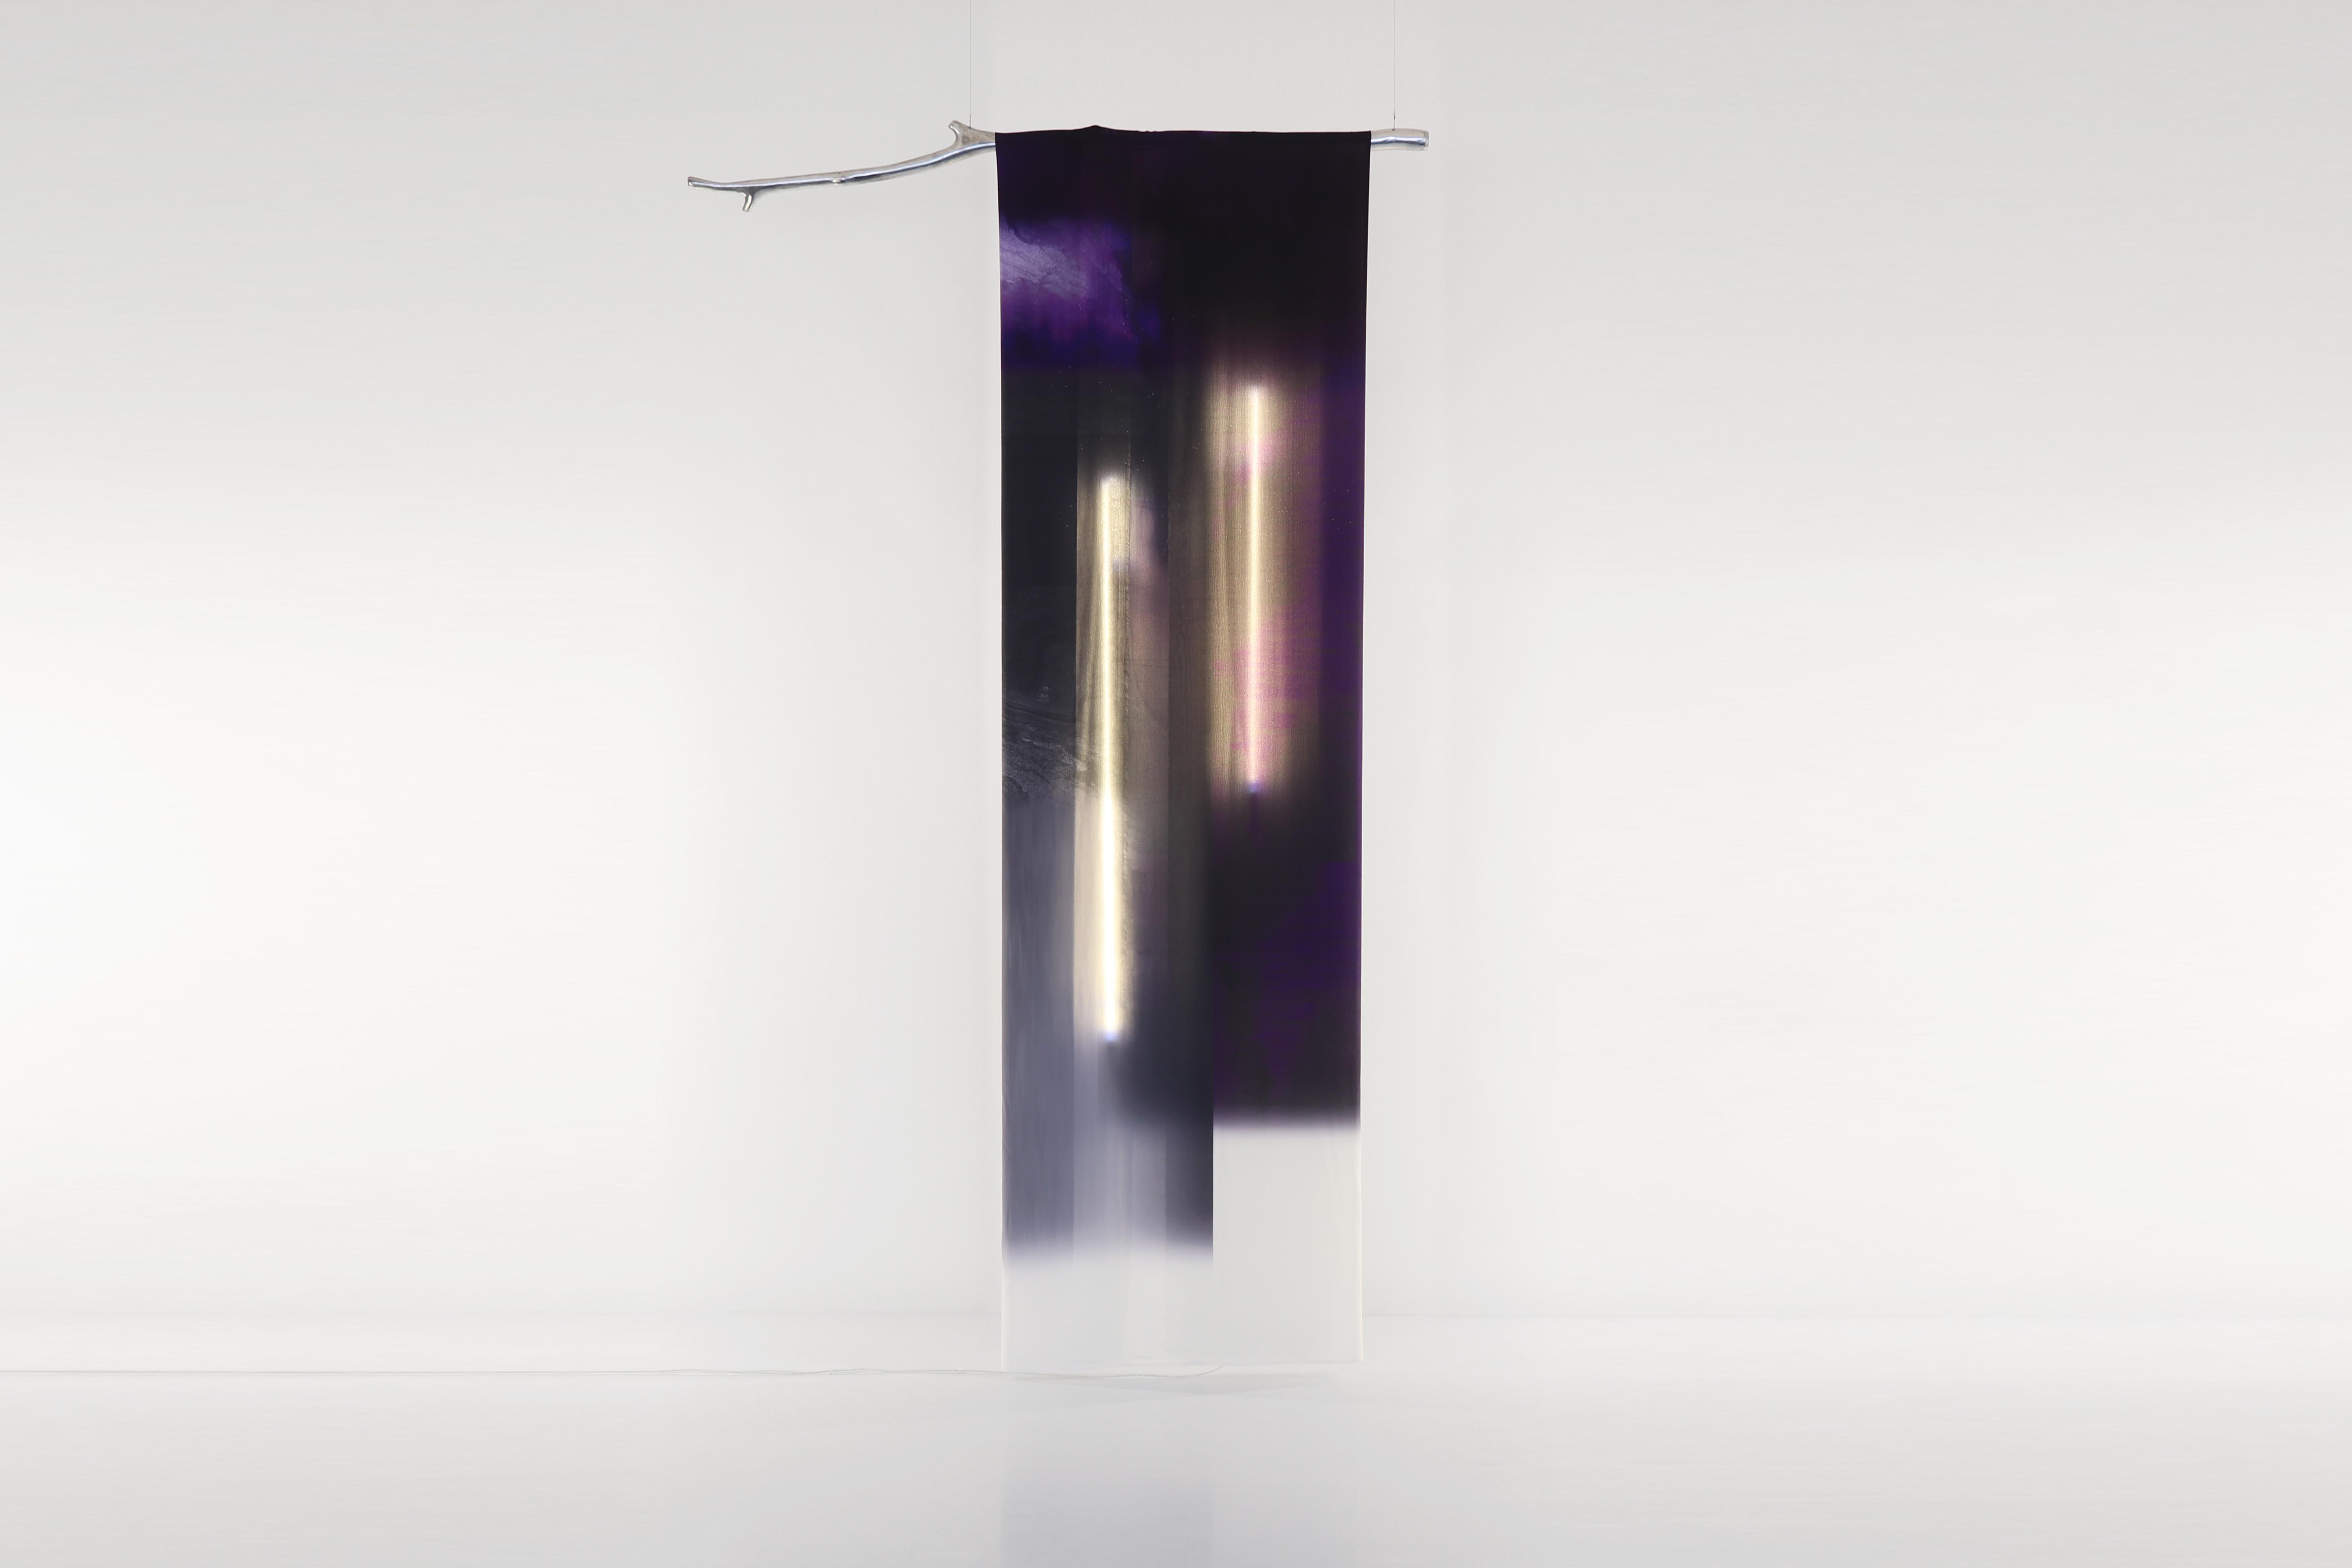 Longing for the Space Between Stars Purple Fabric Light by Batten and Kamp
Dimensions: D70 x H100 cm
Materials: Digital print on silk, Cast aluminium, hand-crafted neon light, electrics.

All our lamps can be wired according to each country. If sold